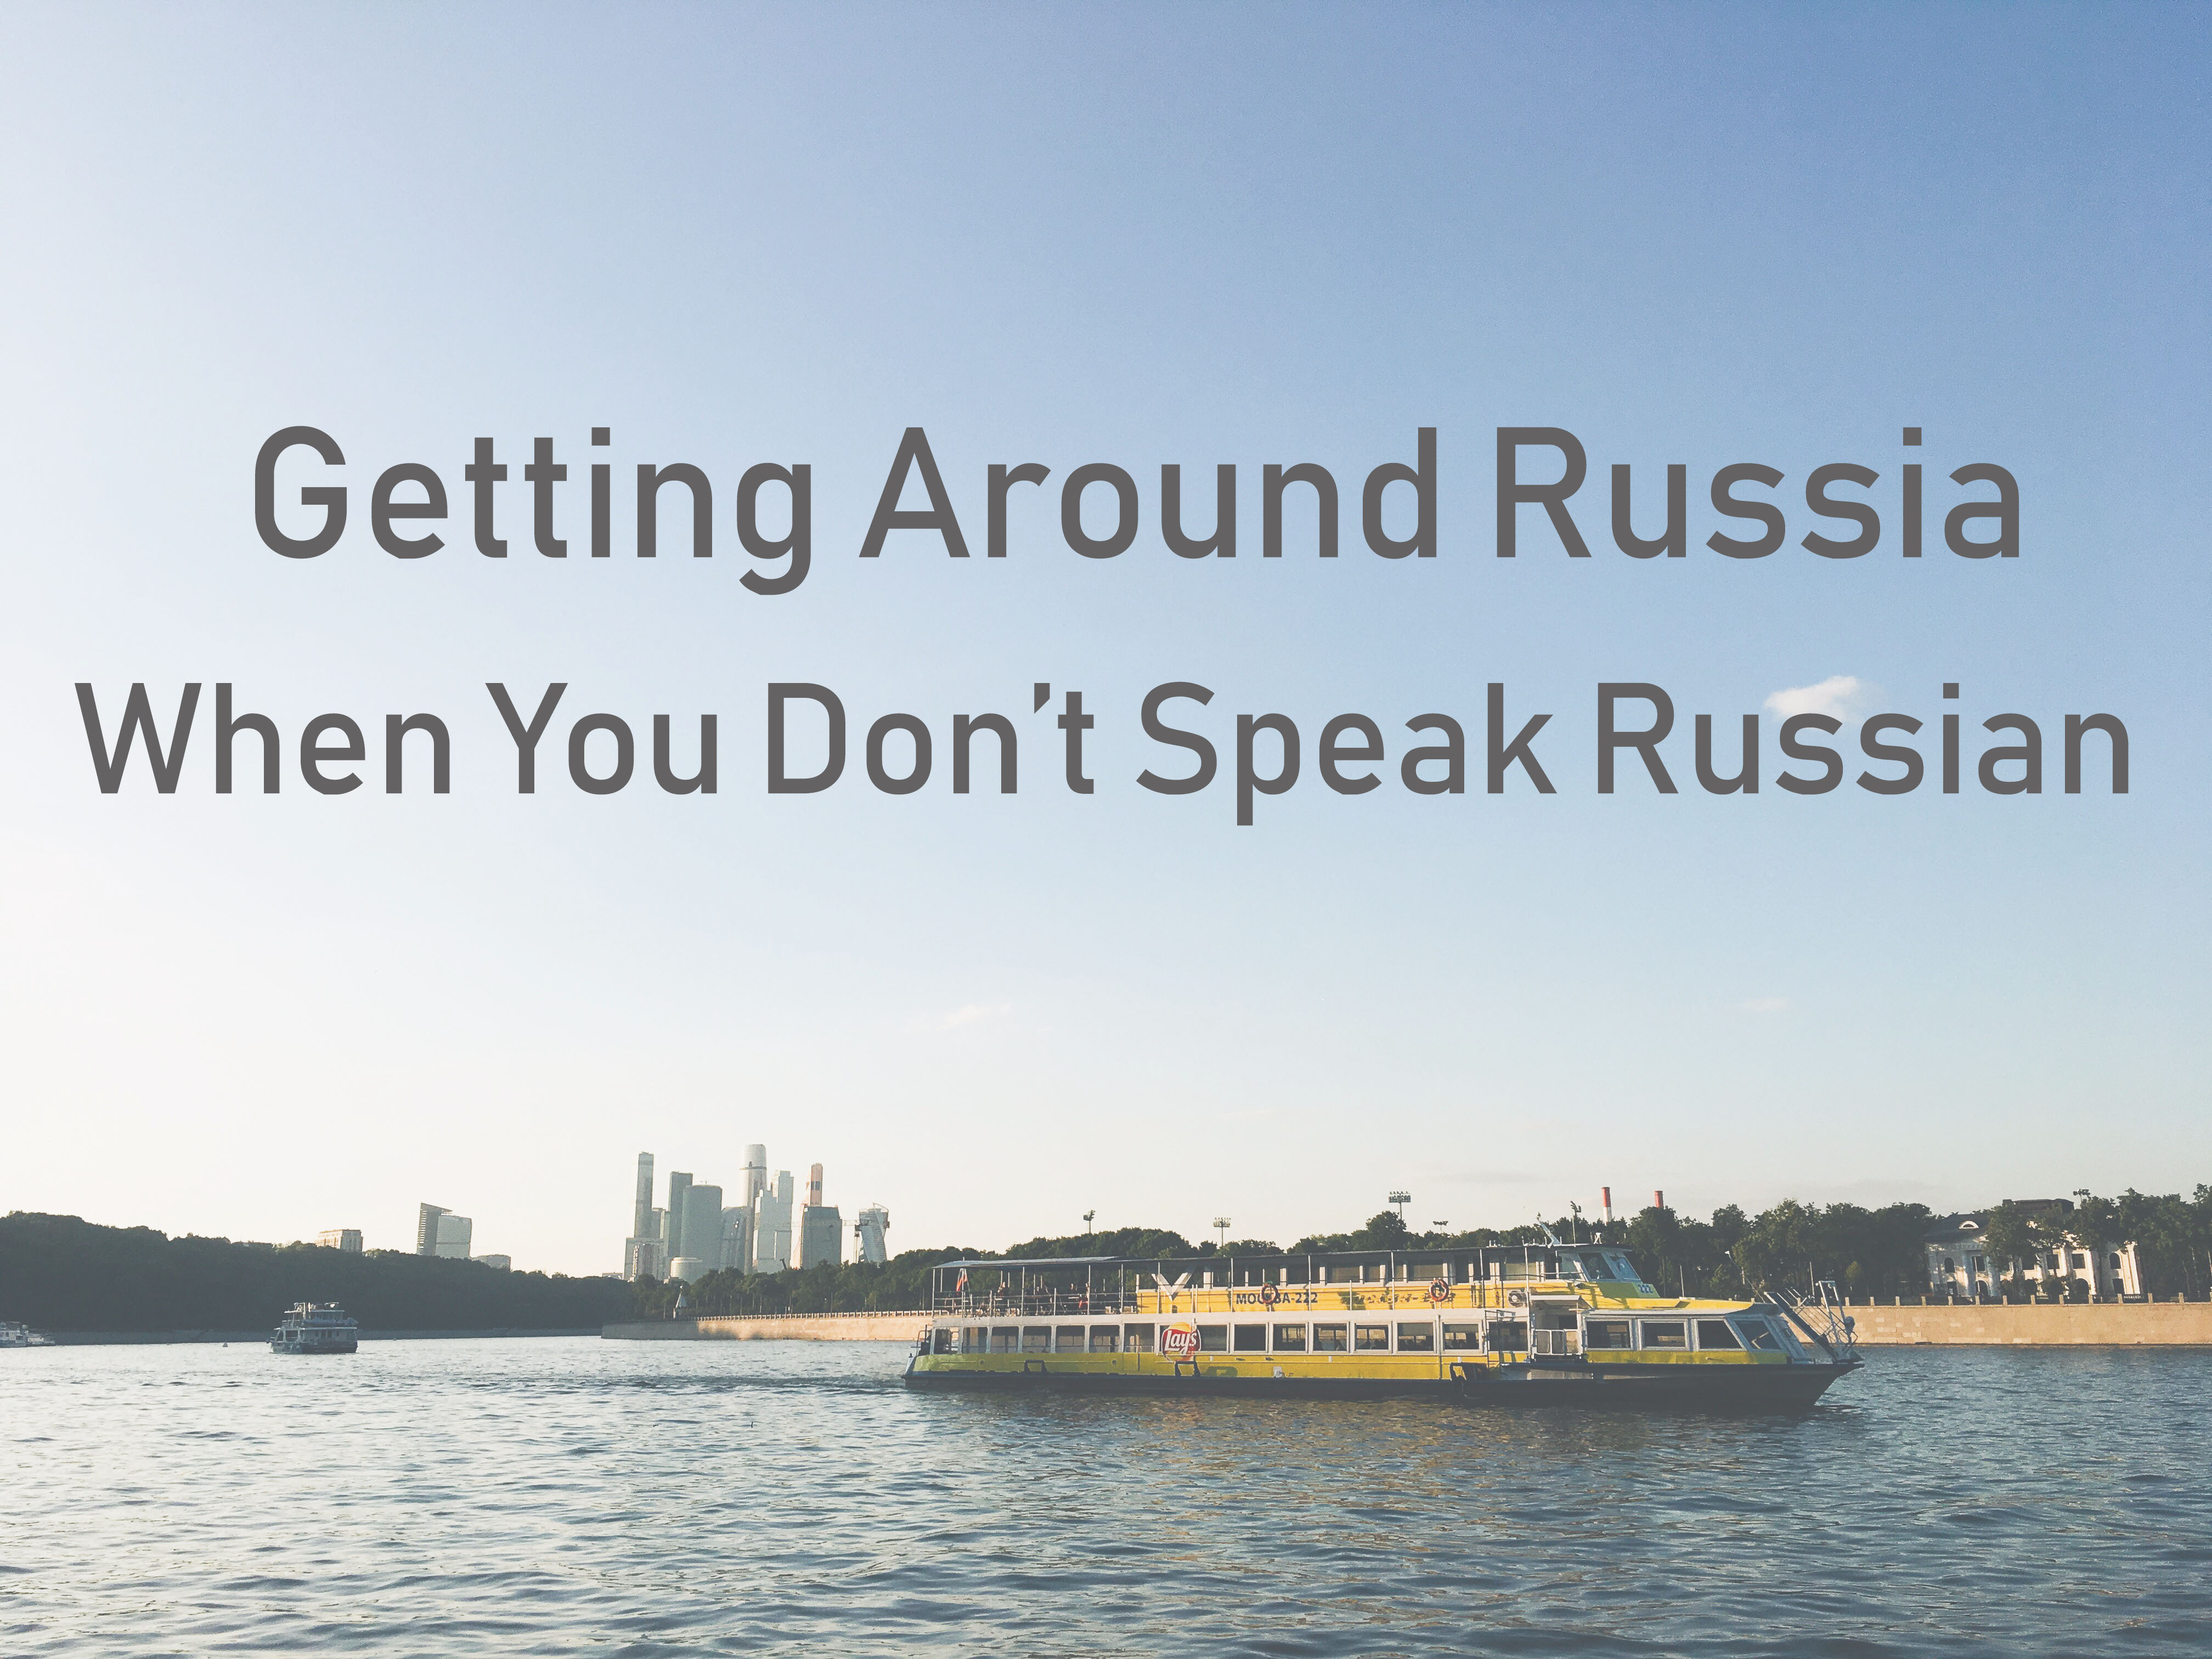 What If I Don’t Speak Russian?